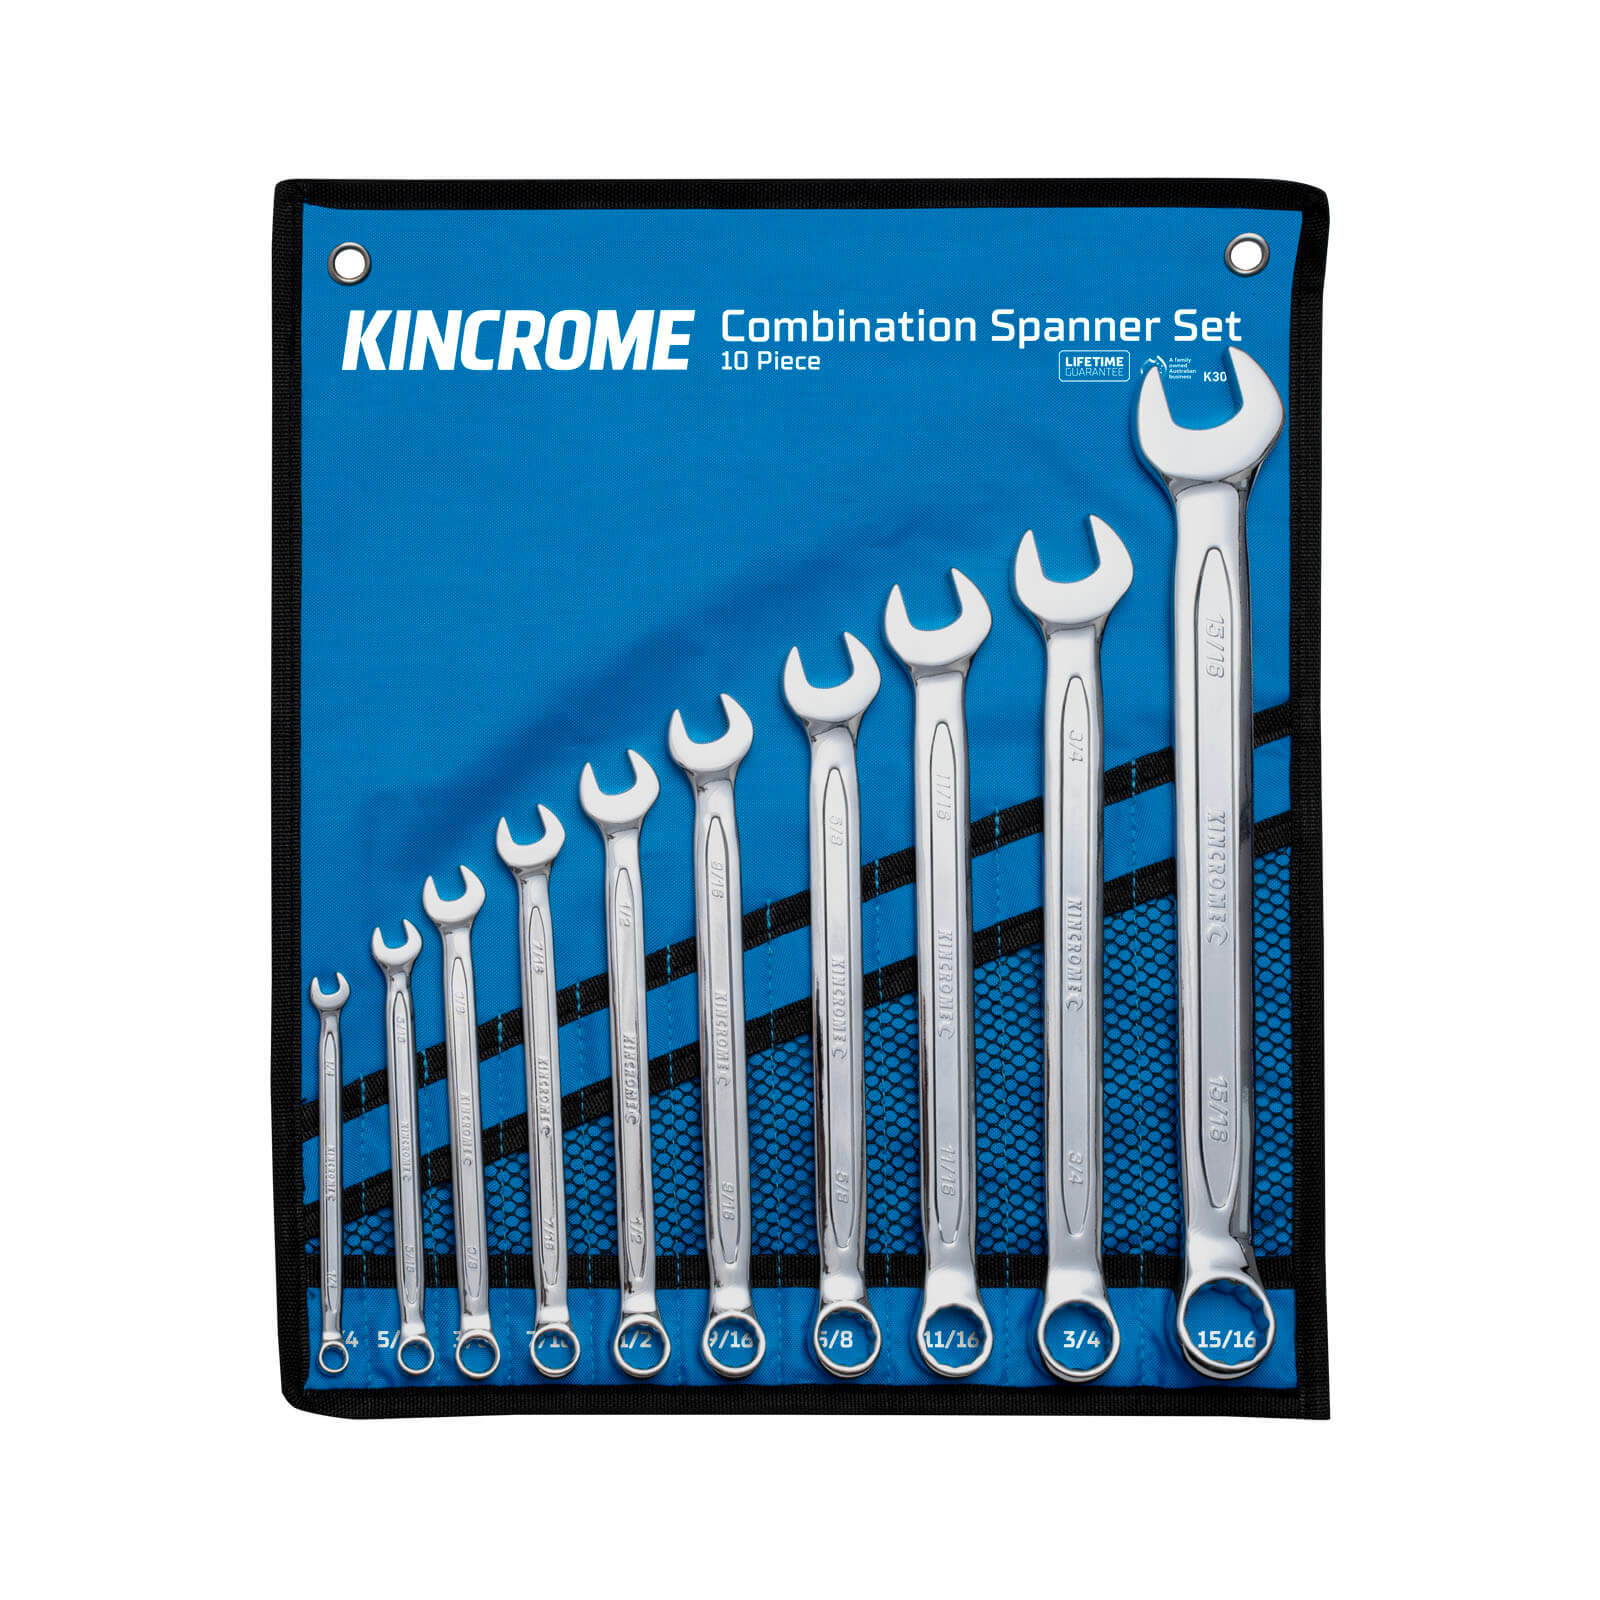 Combination Spanner Set 10 Piece, Imperial - K3046 by Kincrome